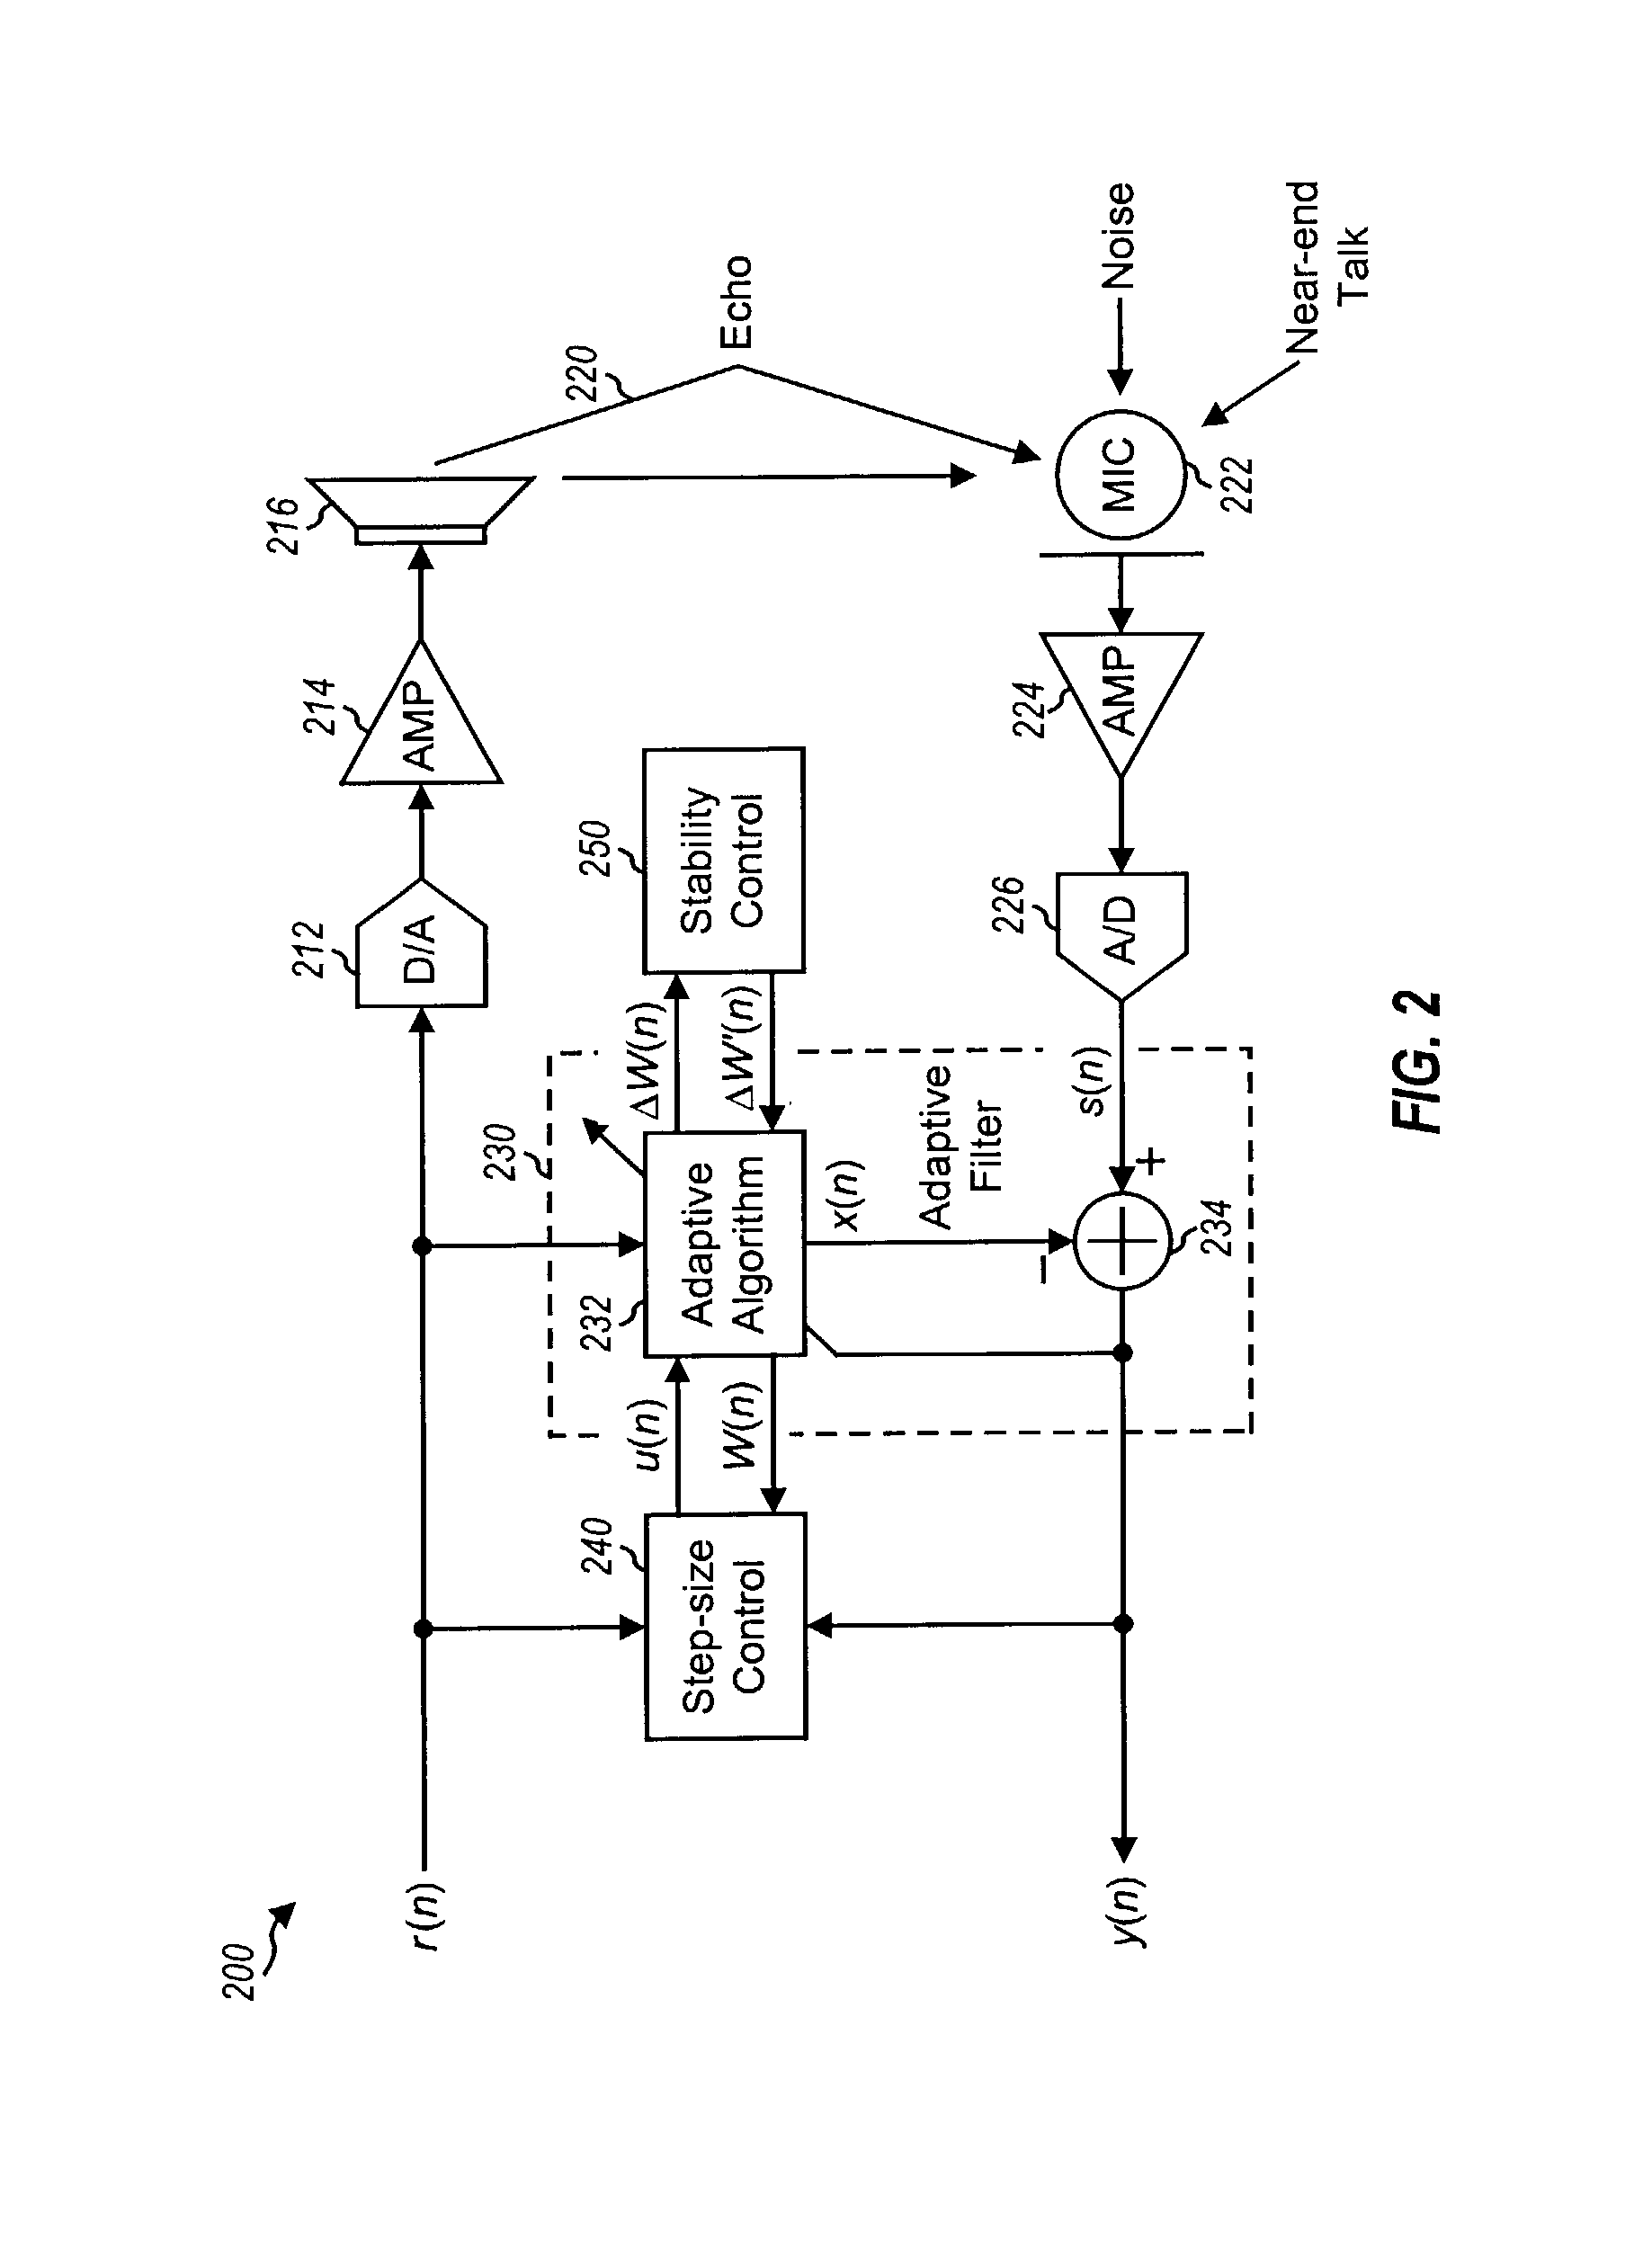 Acoustic echo cancellation with adaptive step size and stability control